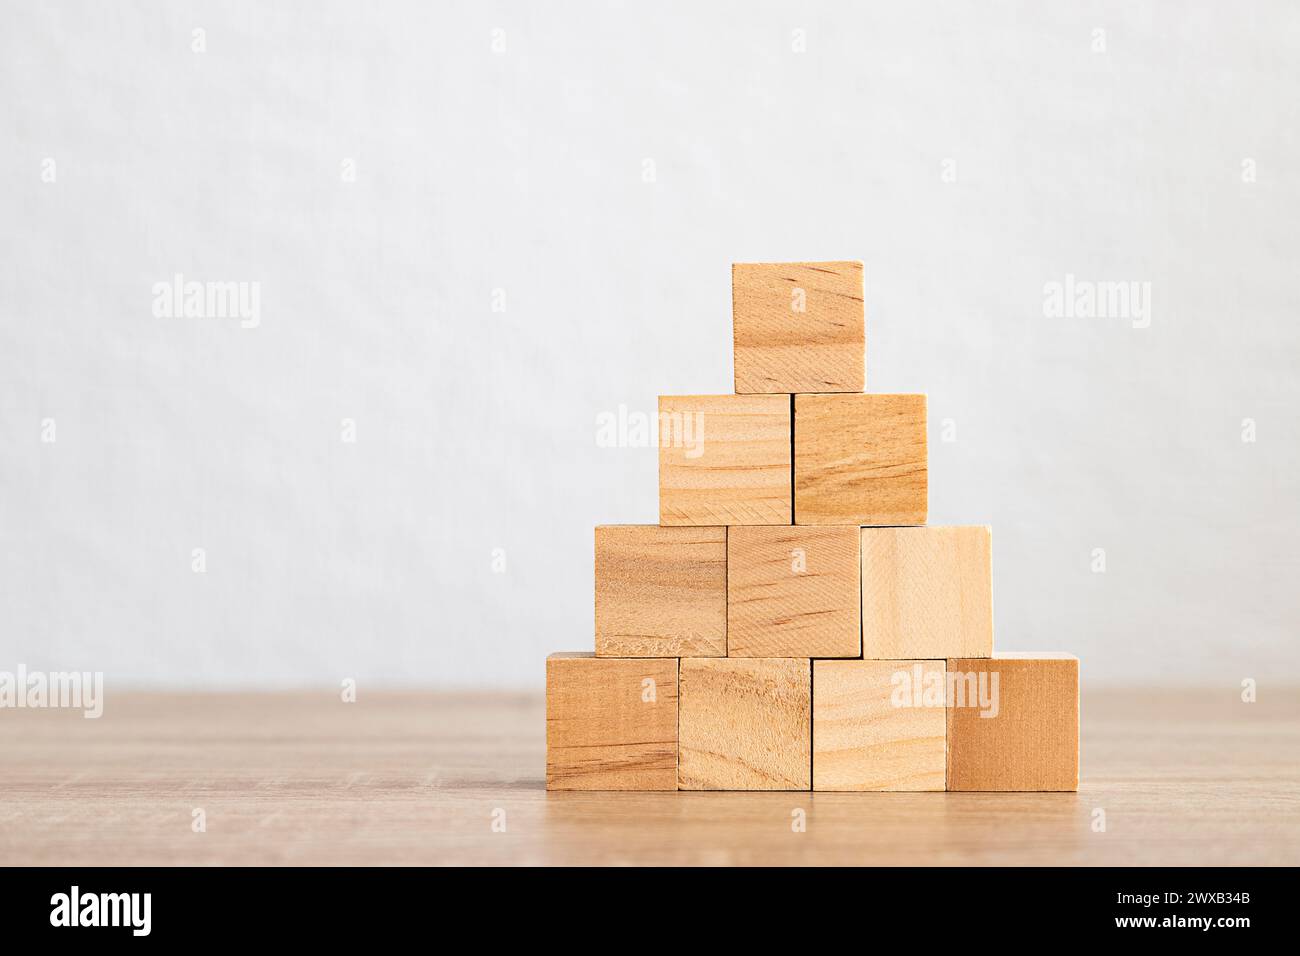 A neatly stacked pyramid of wooden blocks on a plain background. Stock Photo